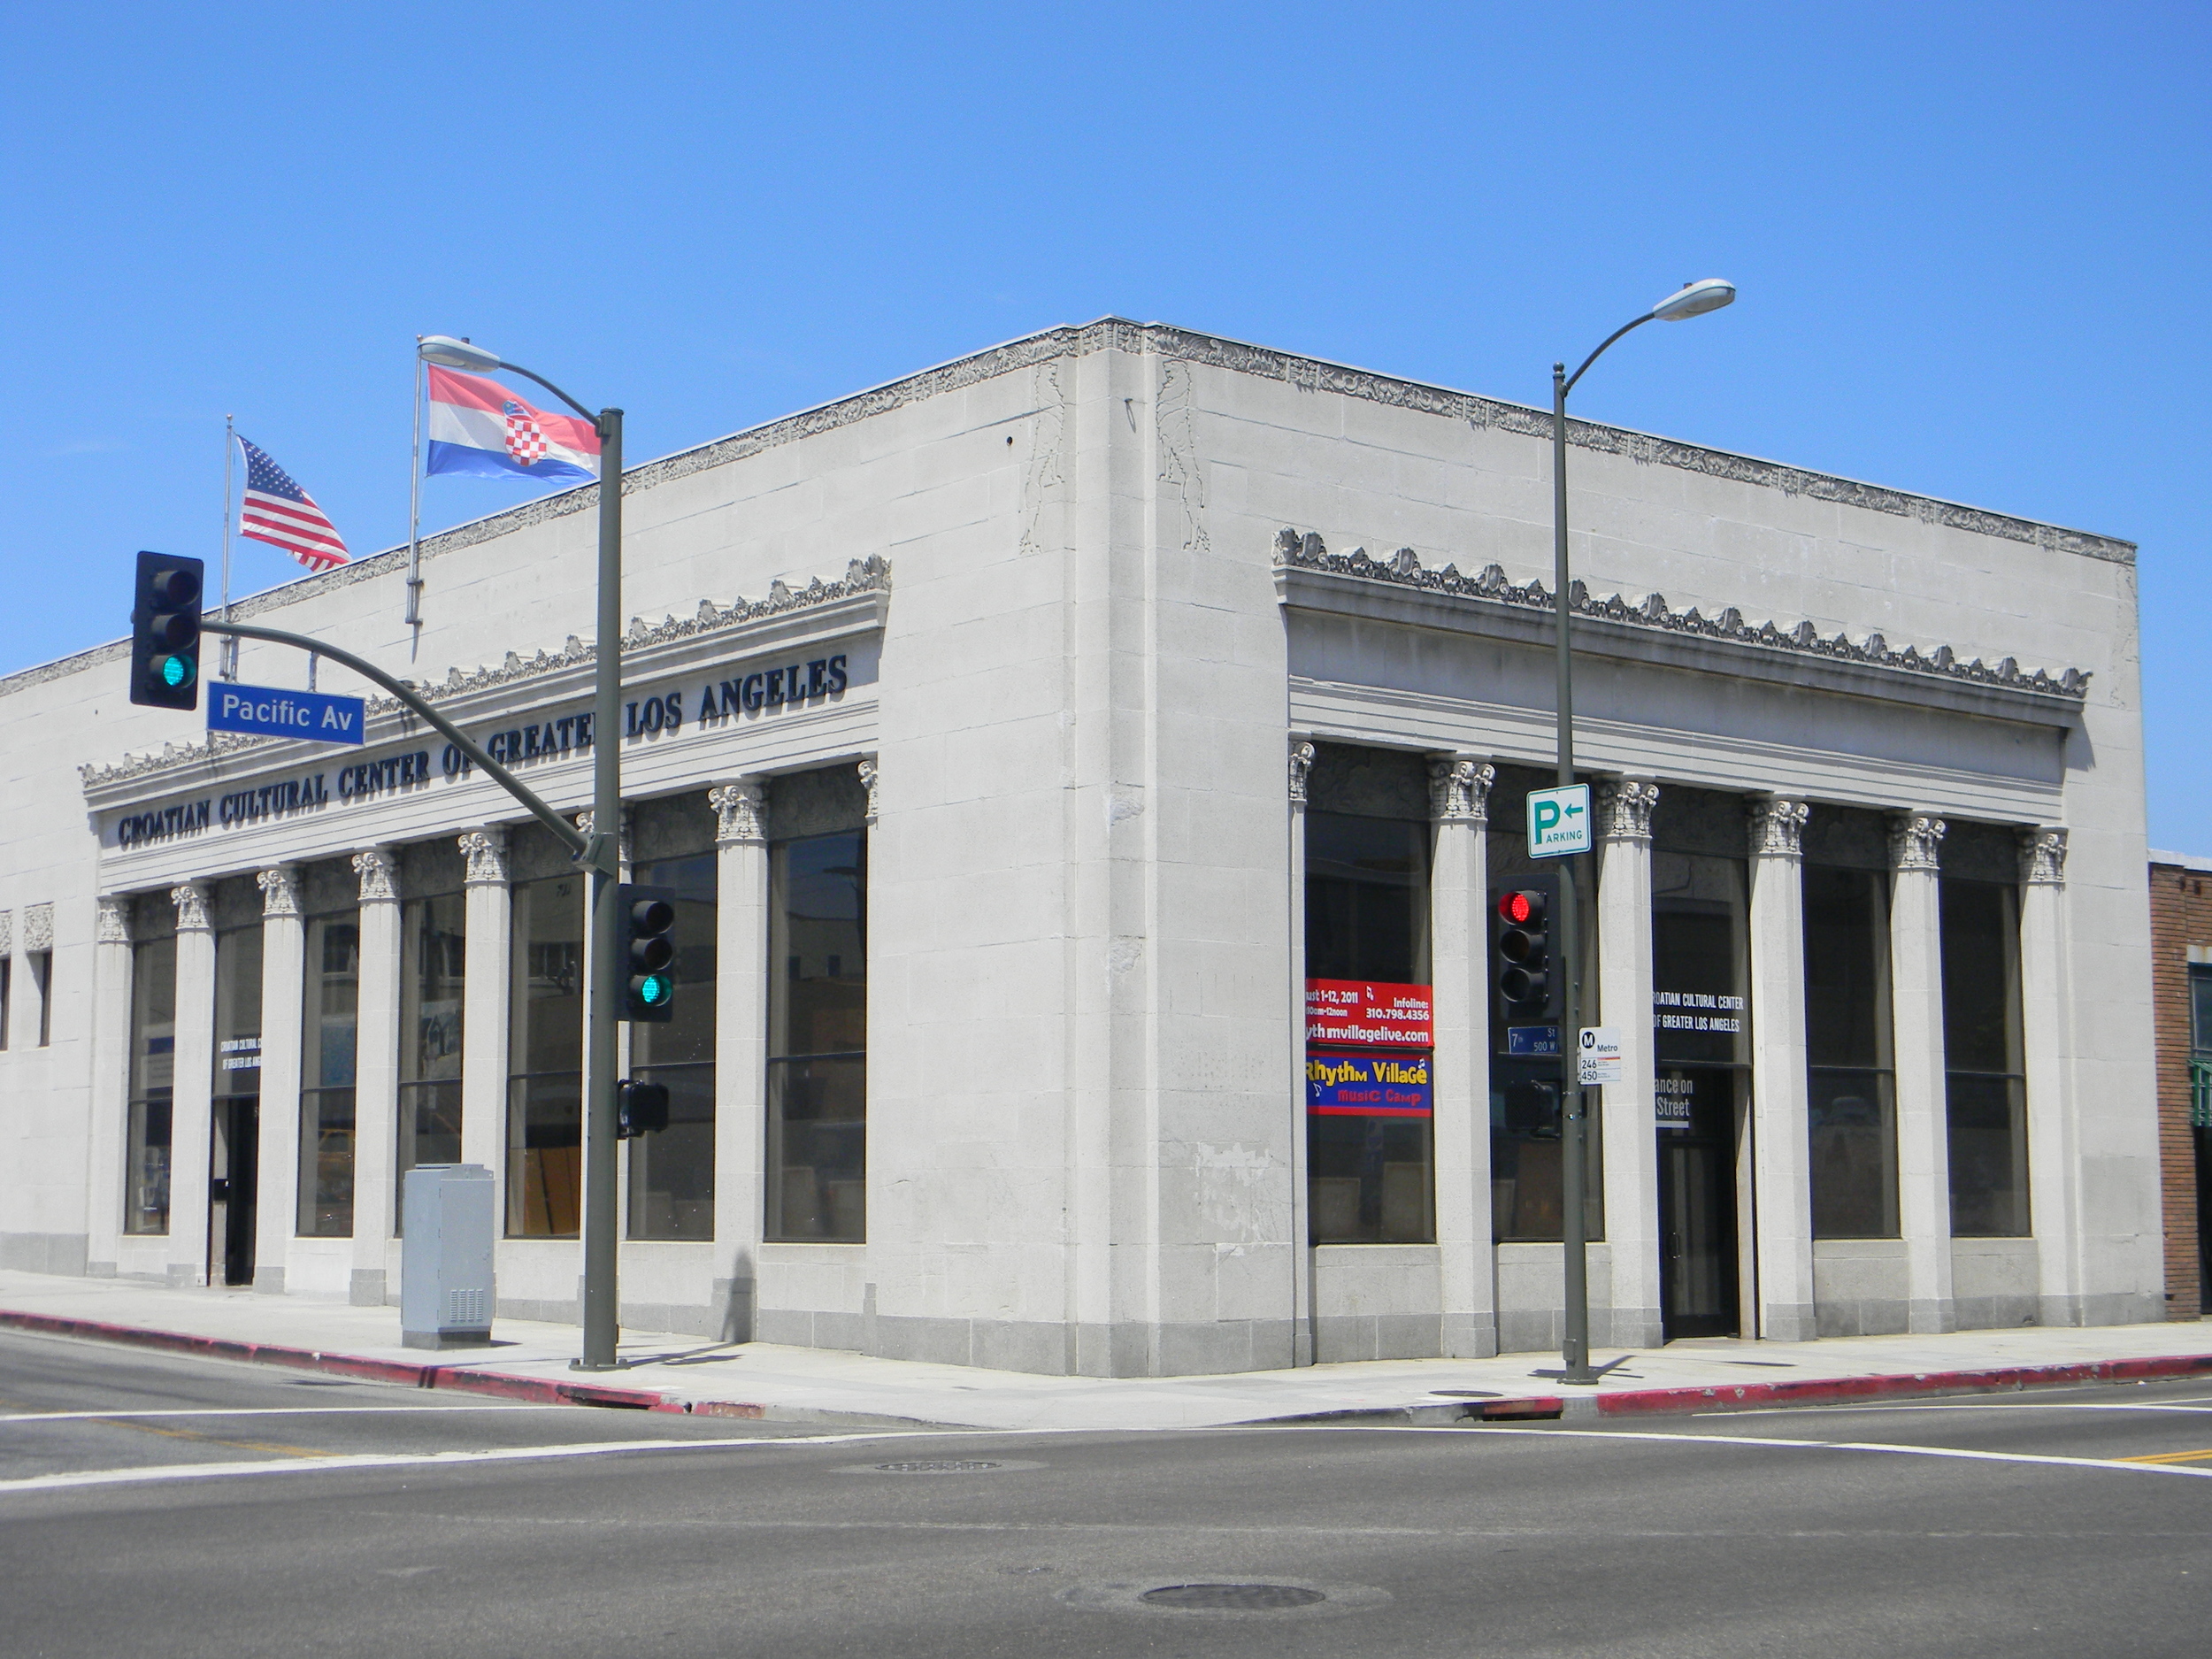  Croatian Cultural Center of Greater Los Angeles 